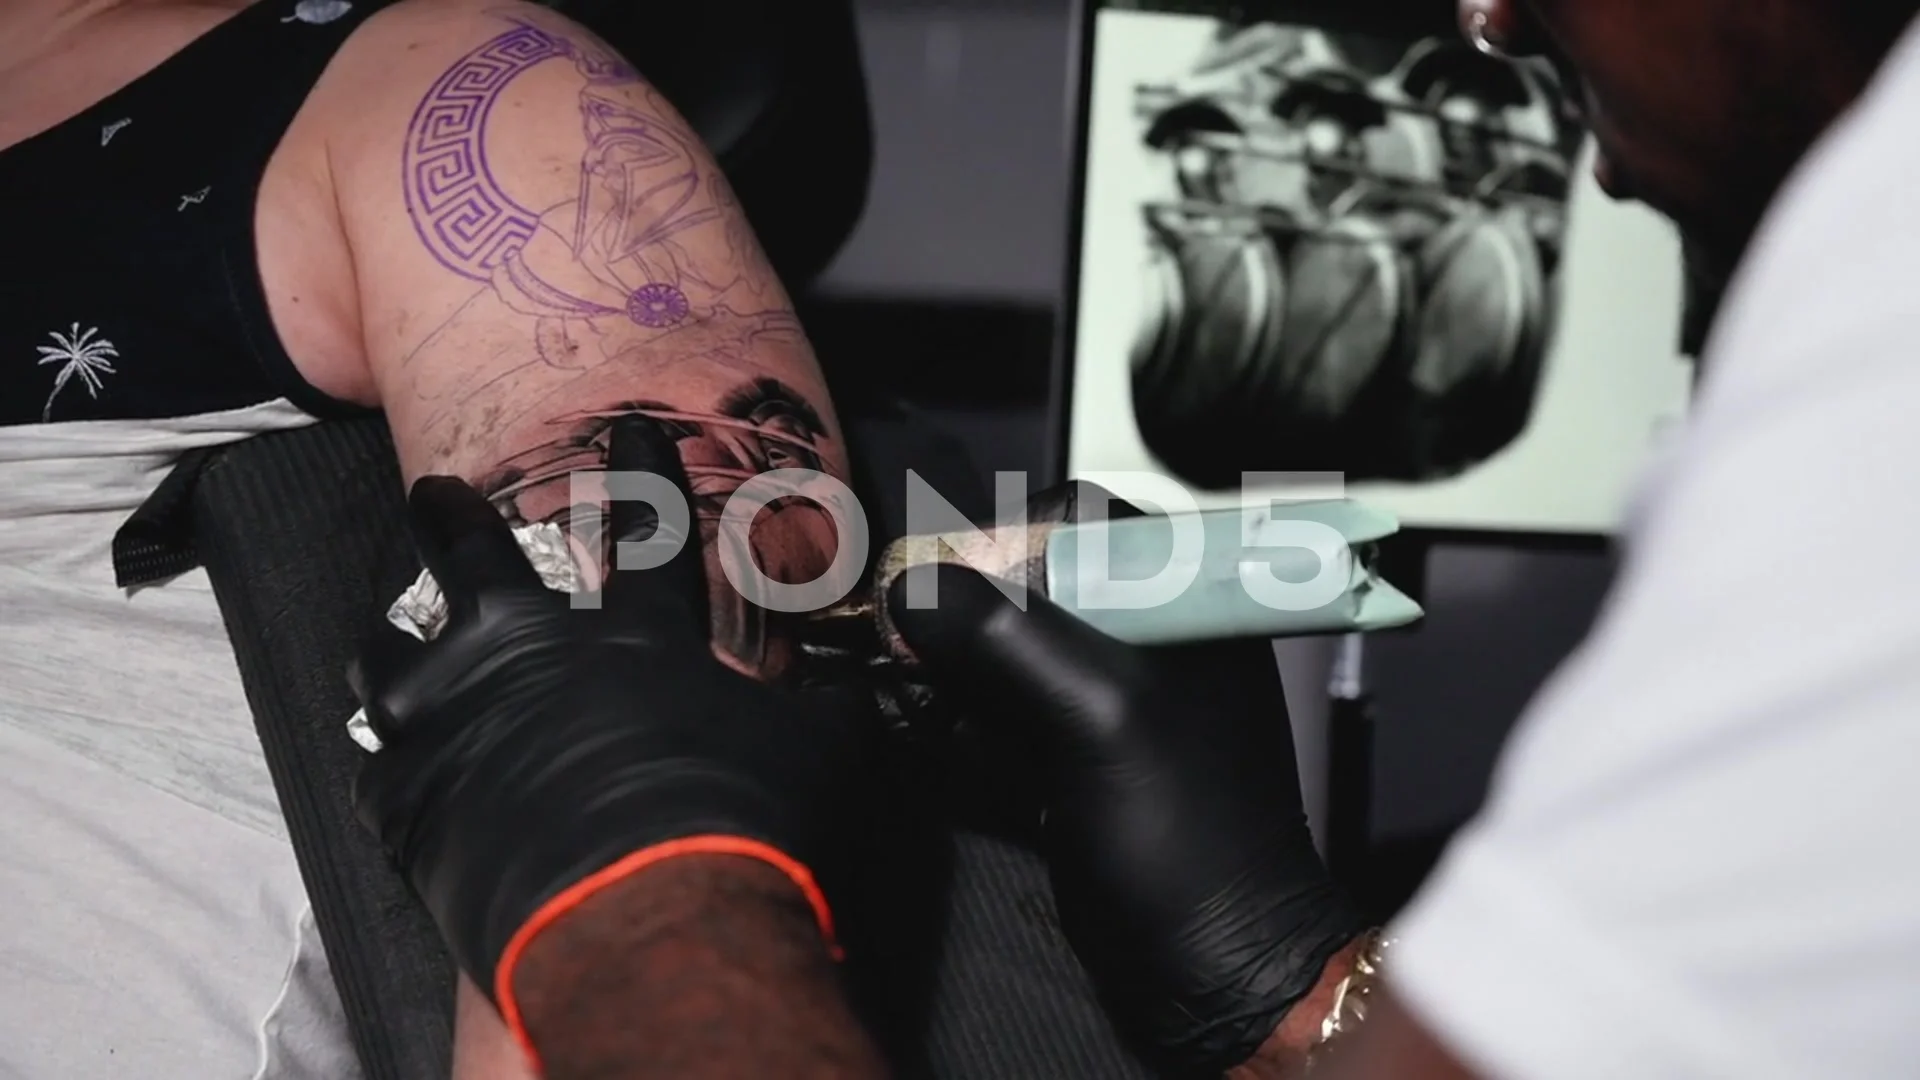 Tattoos in Slow Motion: Very Gross, Kinda Mesmerizing | WIRED